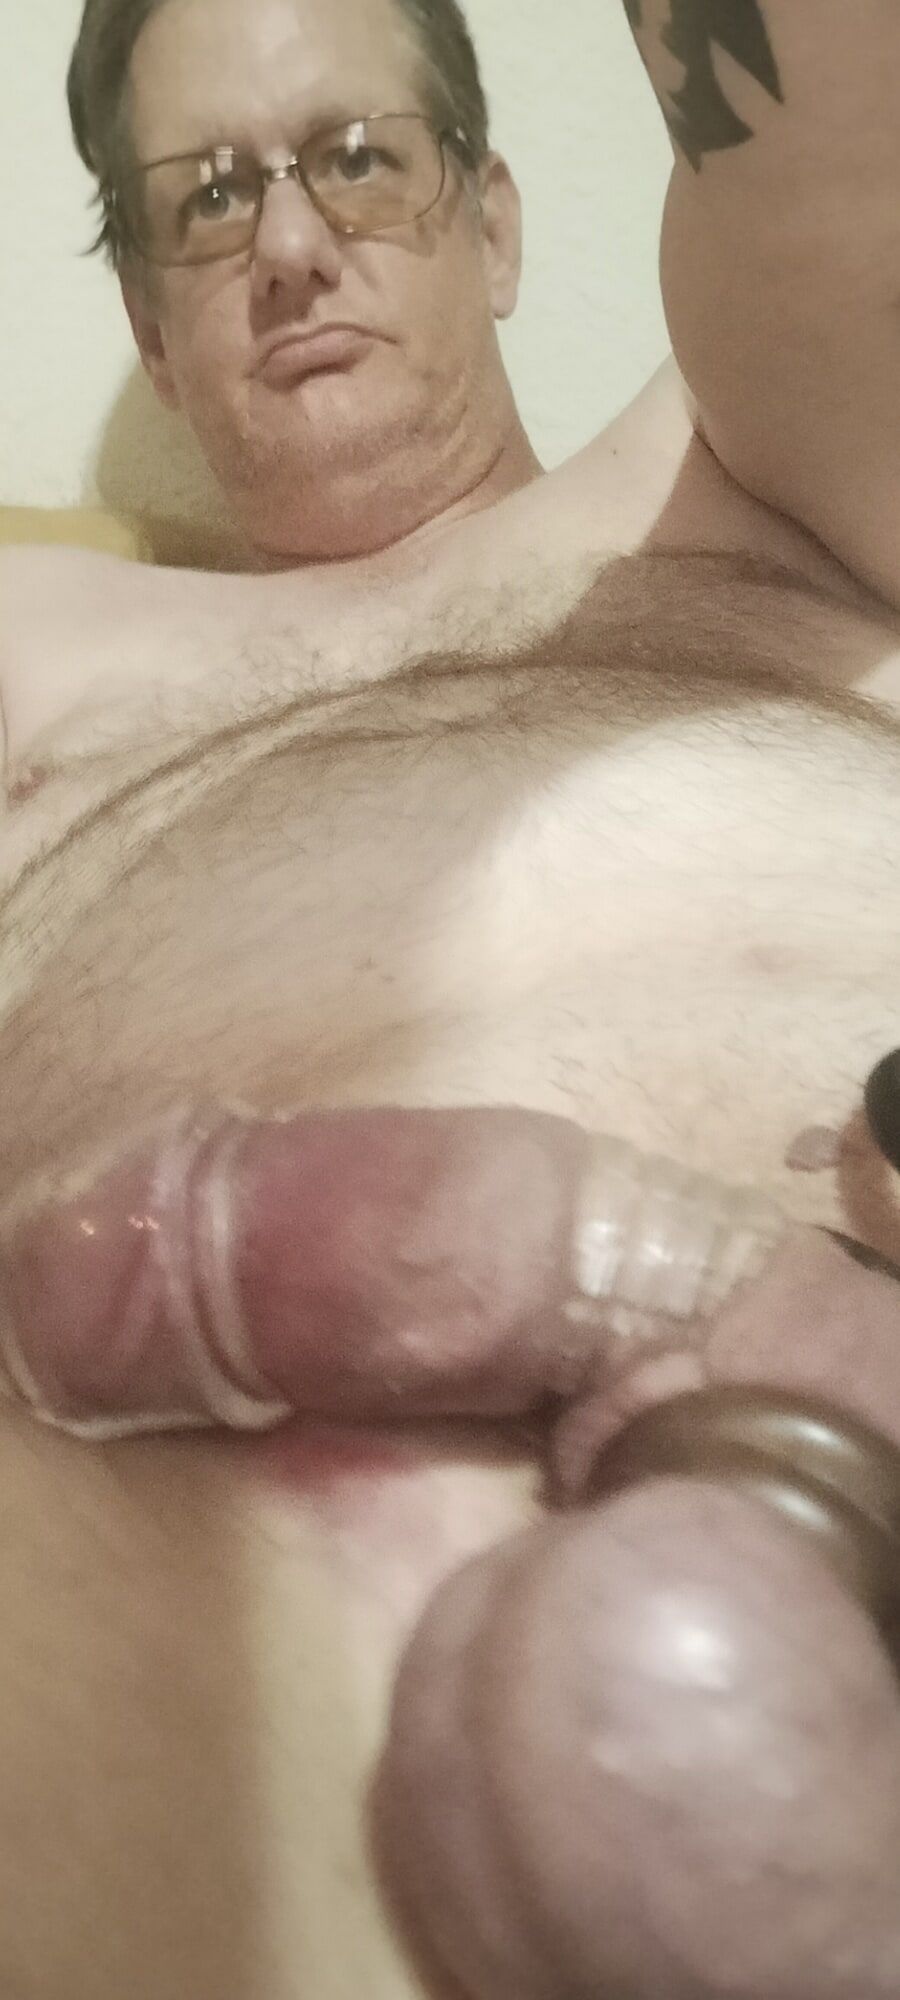 My spun self and I want any and all cocks! #55